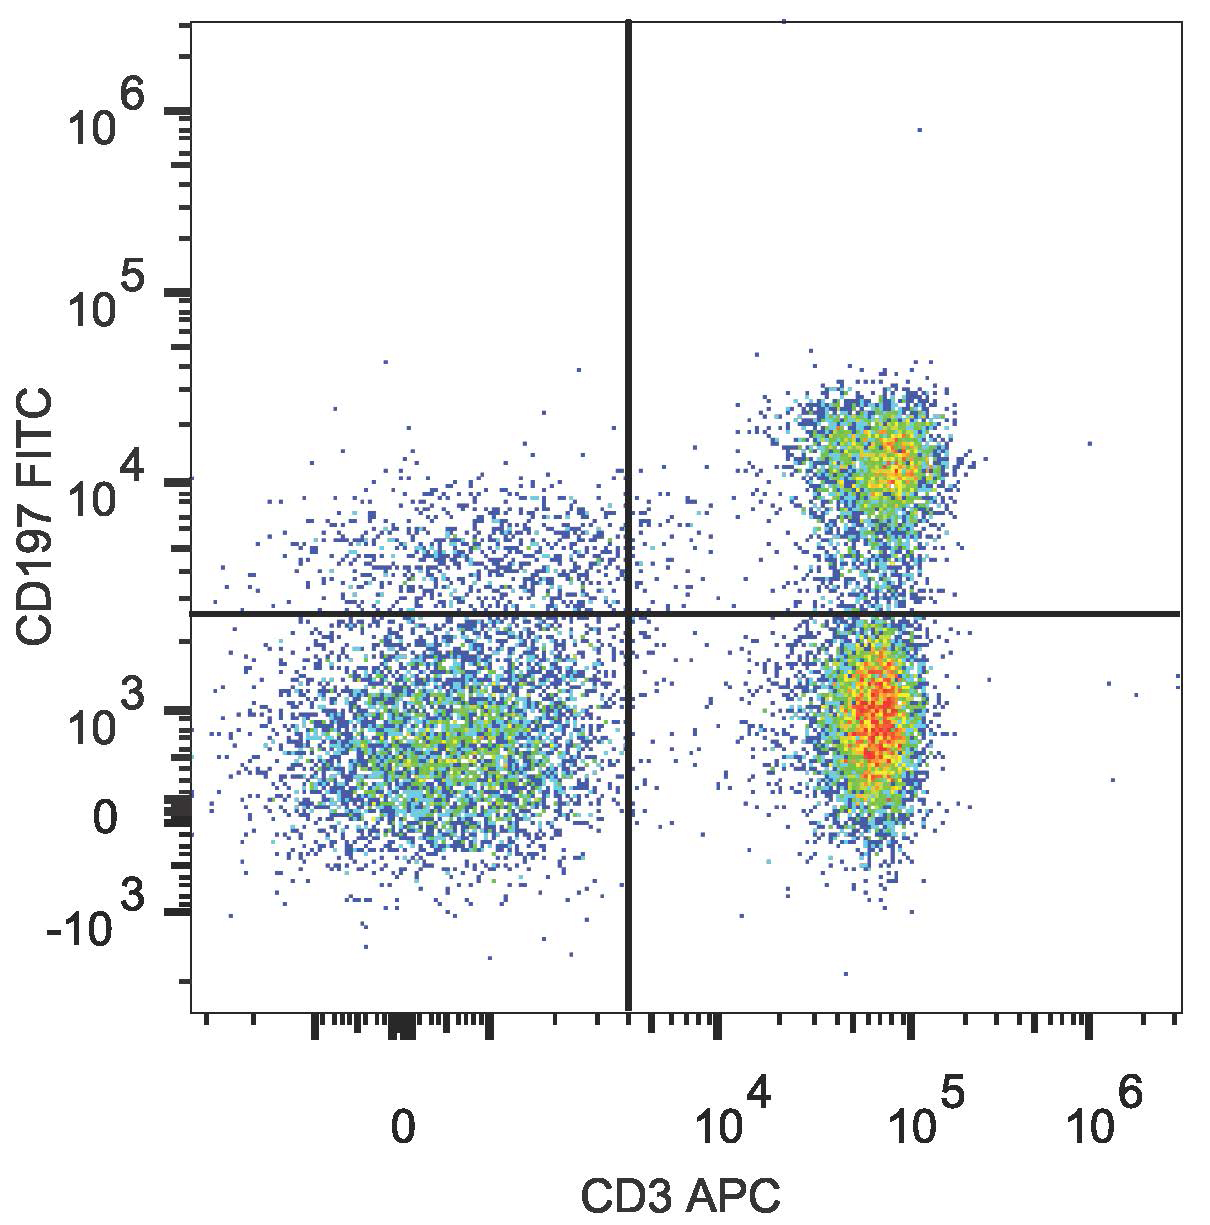 Human peripheral blood lymphocytes are stained with Anti-Human CD197 Monoclonal Antibody(FITC Conjugated) and Anti-Human CD3 Monoclonal Antibody（APC Conjugated)